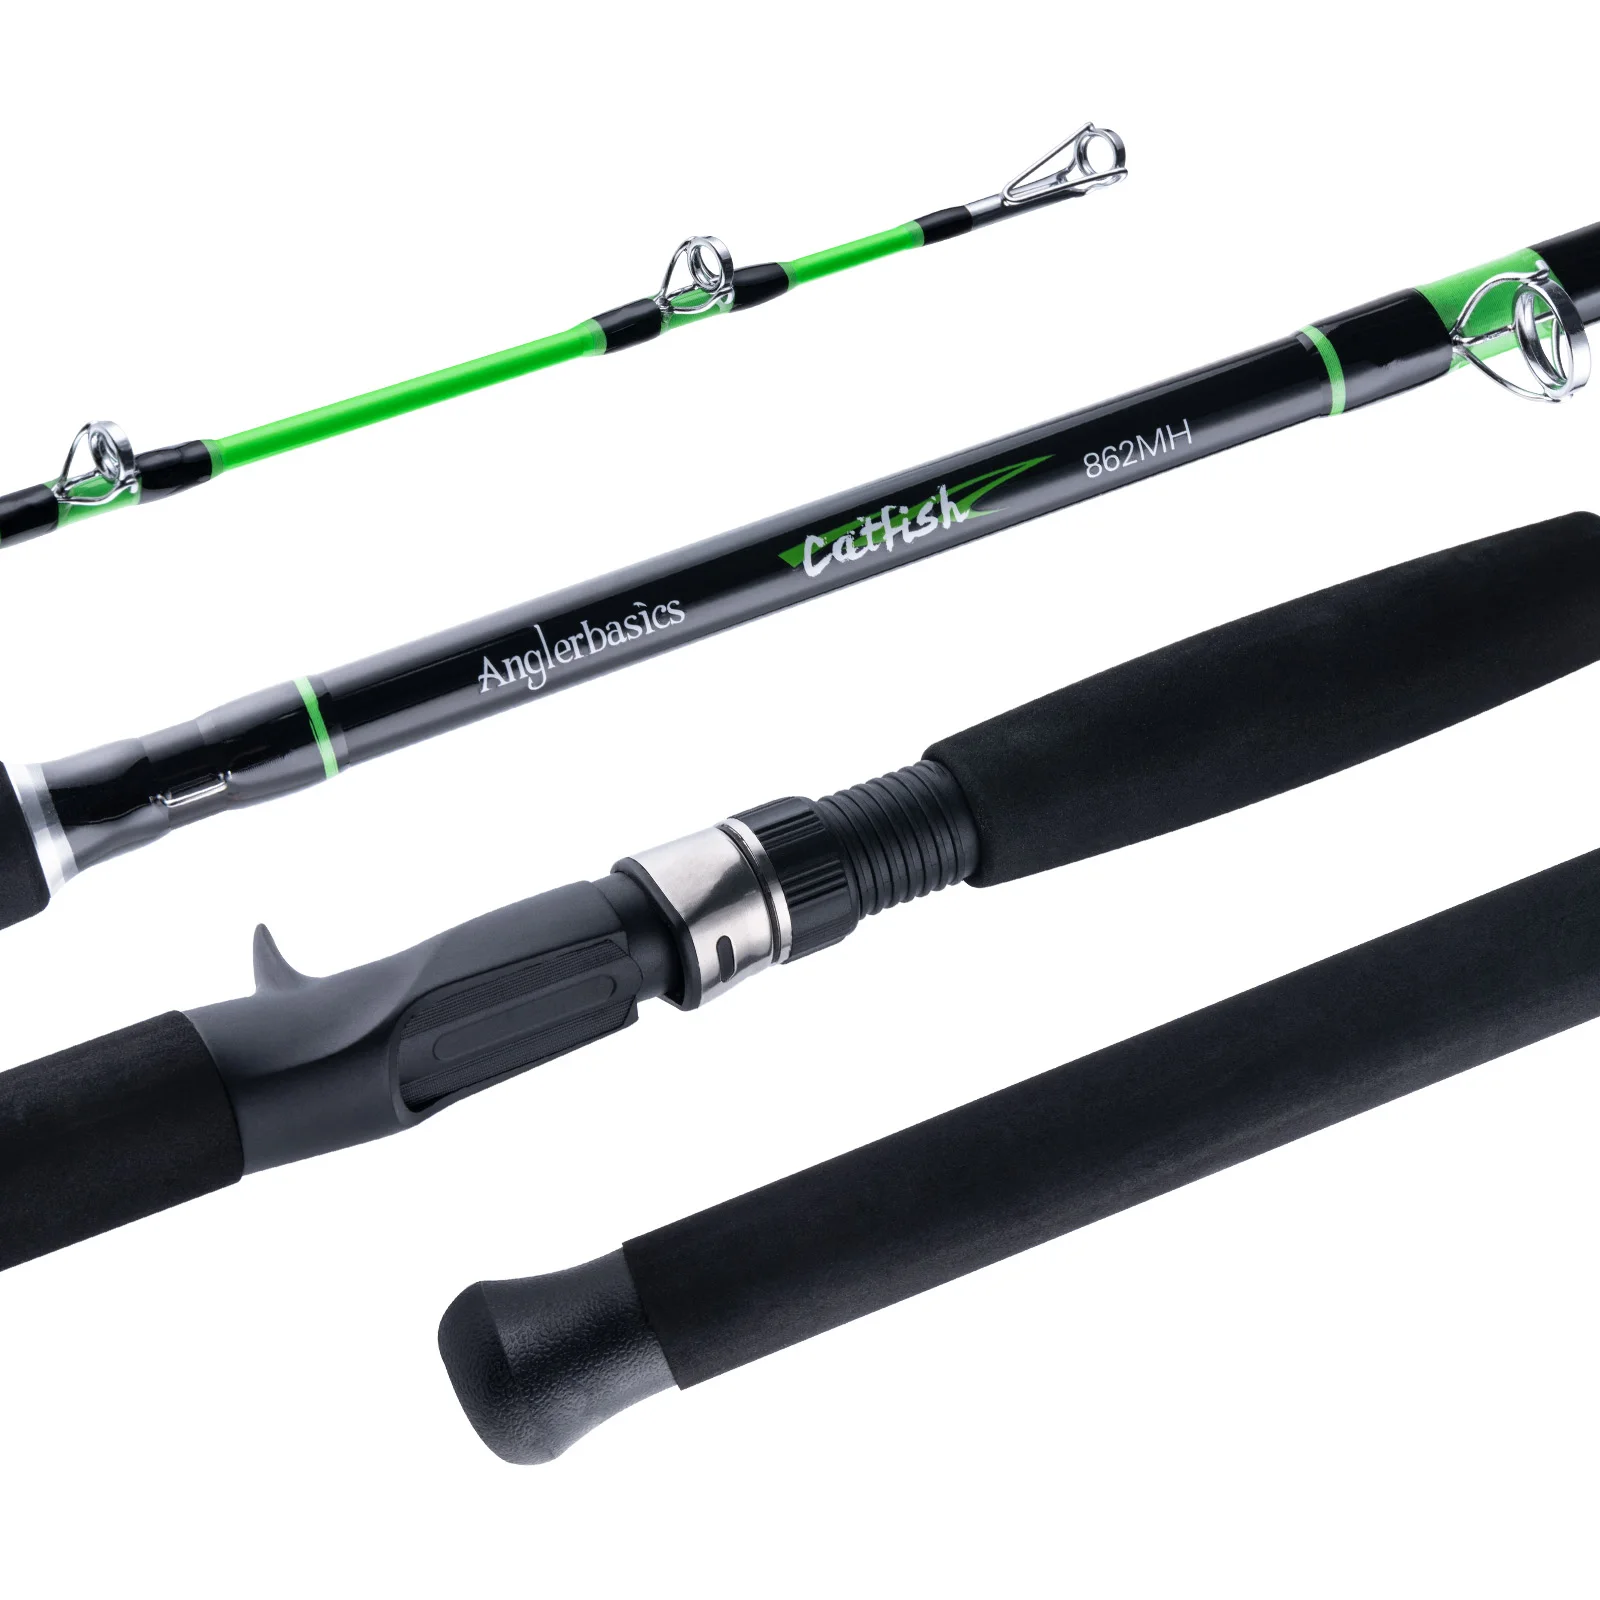 Goture Catfish 2-sections Casting Rod professional Catfish Rod 2.28m 2.59m  M Fishing Rod For Lake River Fishing tackle